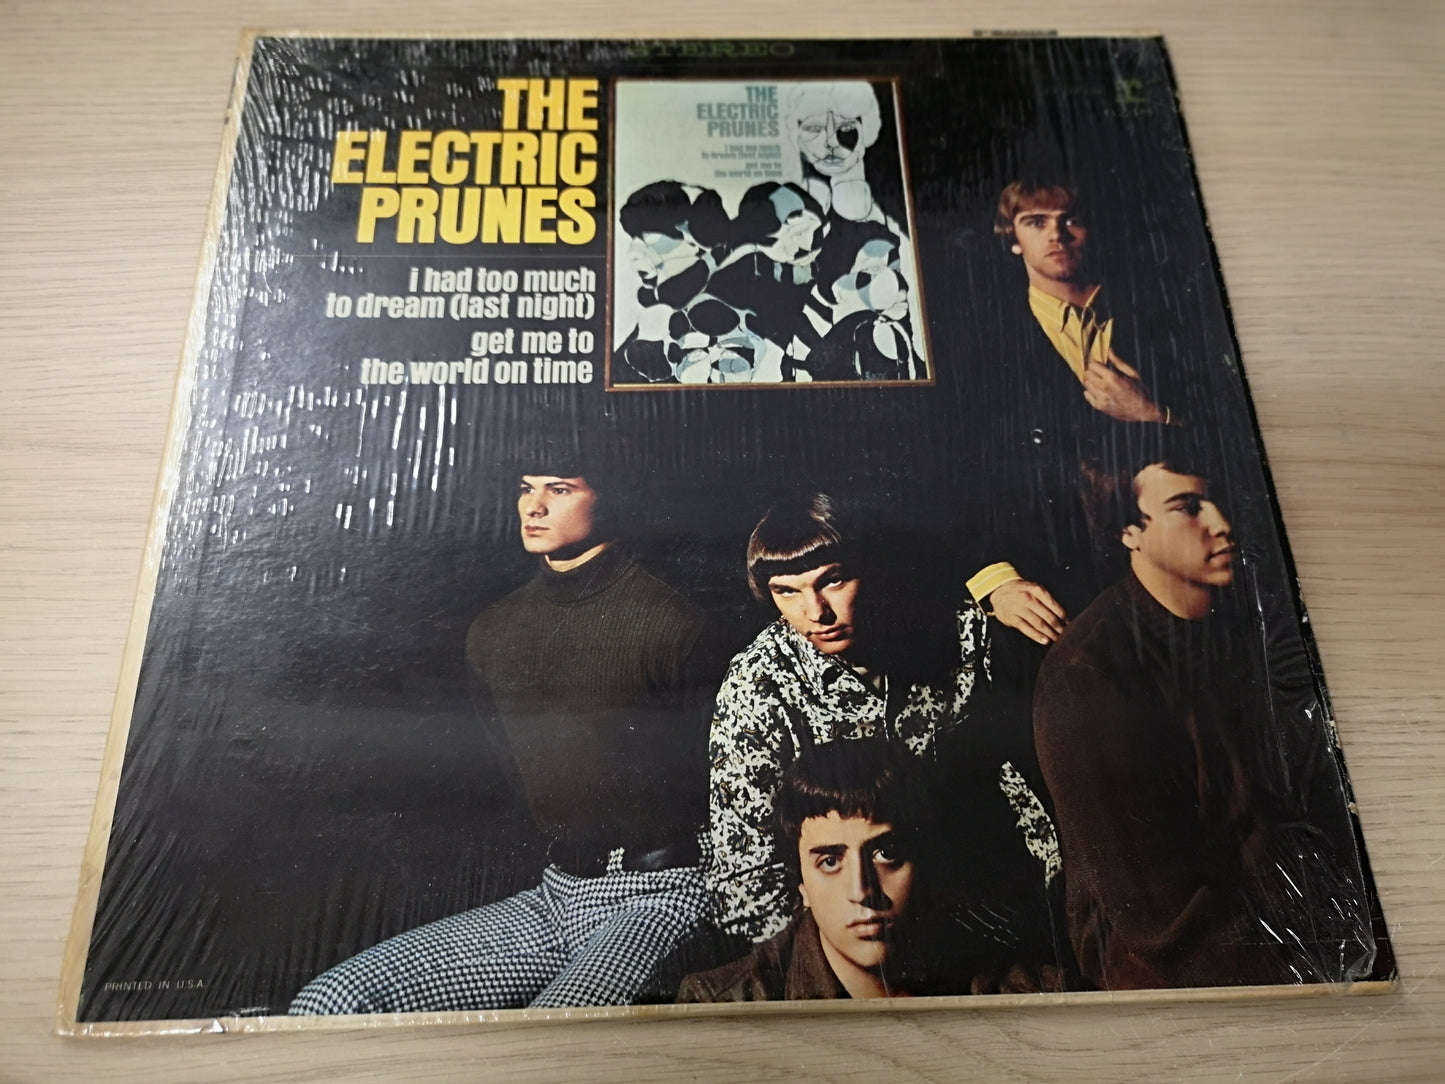 Electric Prunes "I Had too Much to Dream(Last Night)" Orig US Stereo VG++/EX